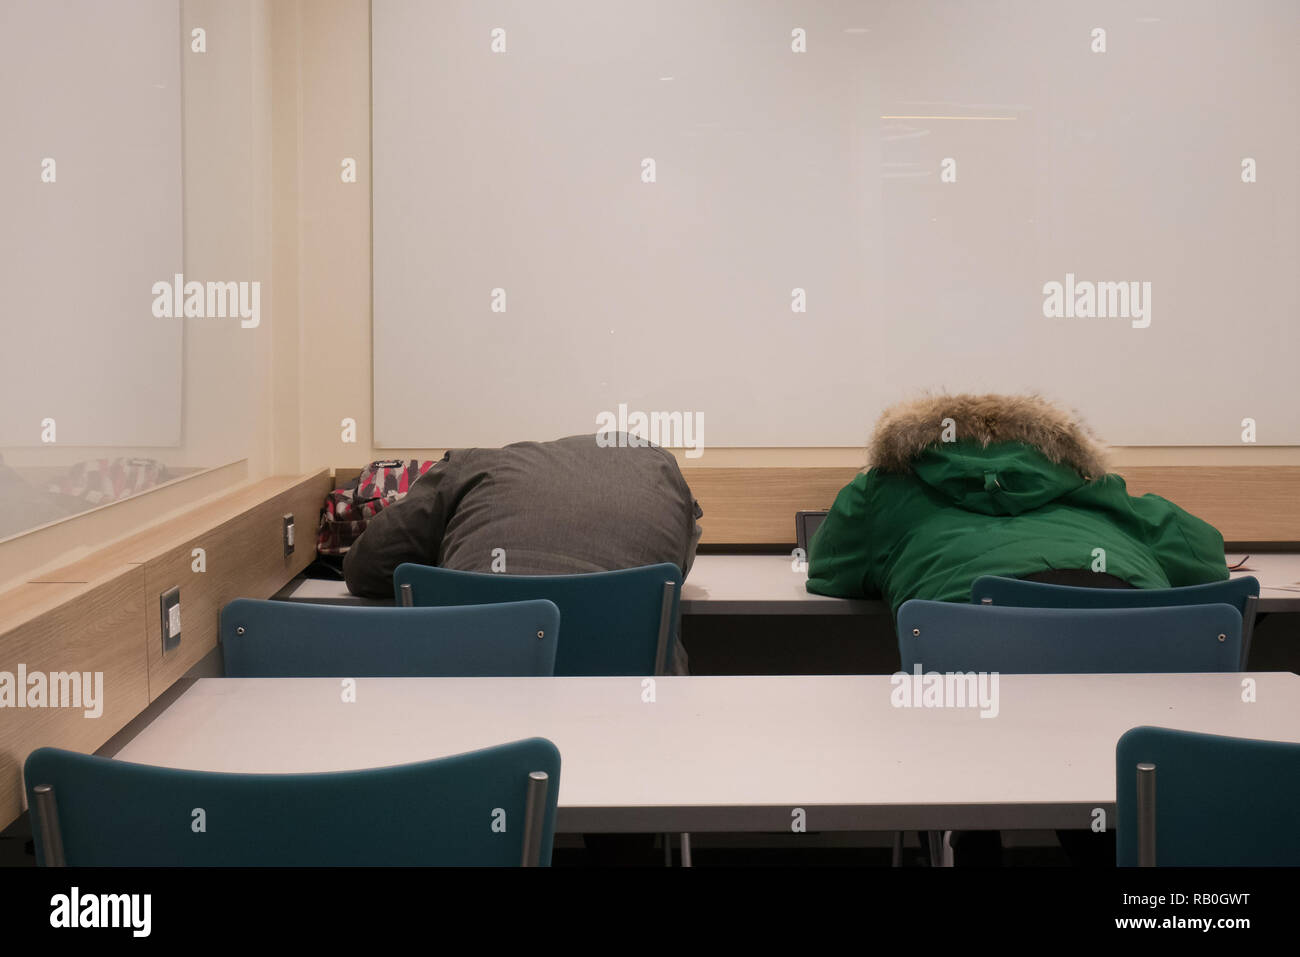 people taking a nap on a desk Stock Photo